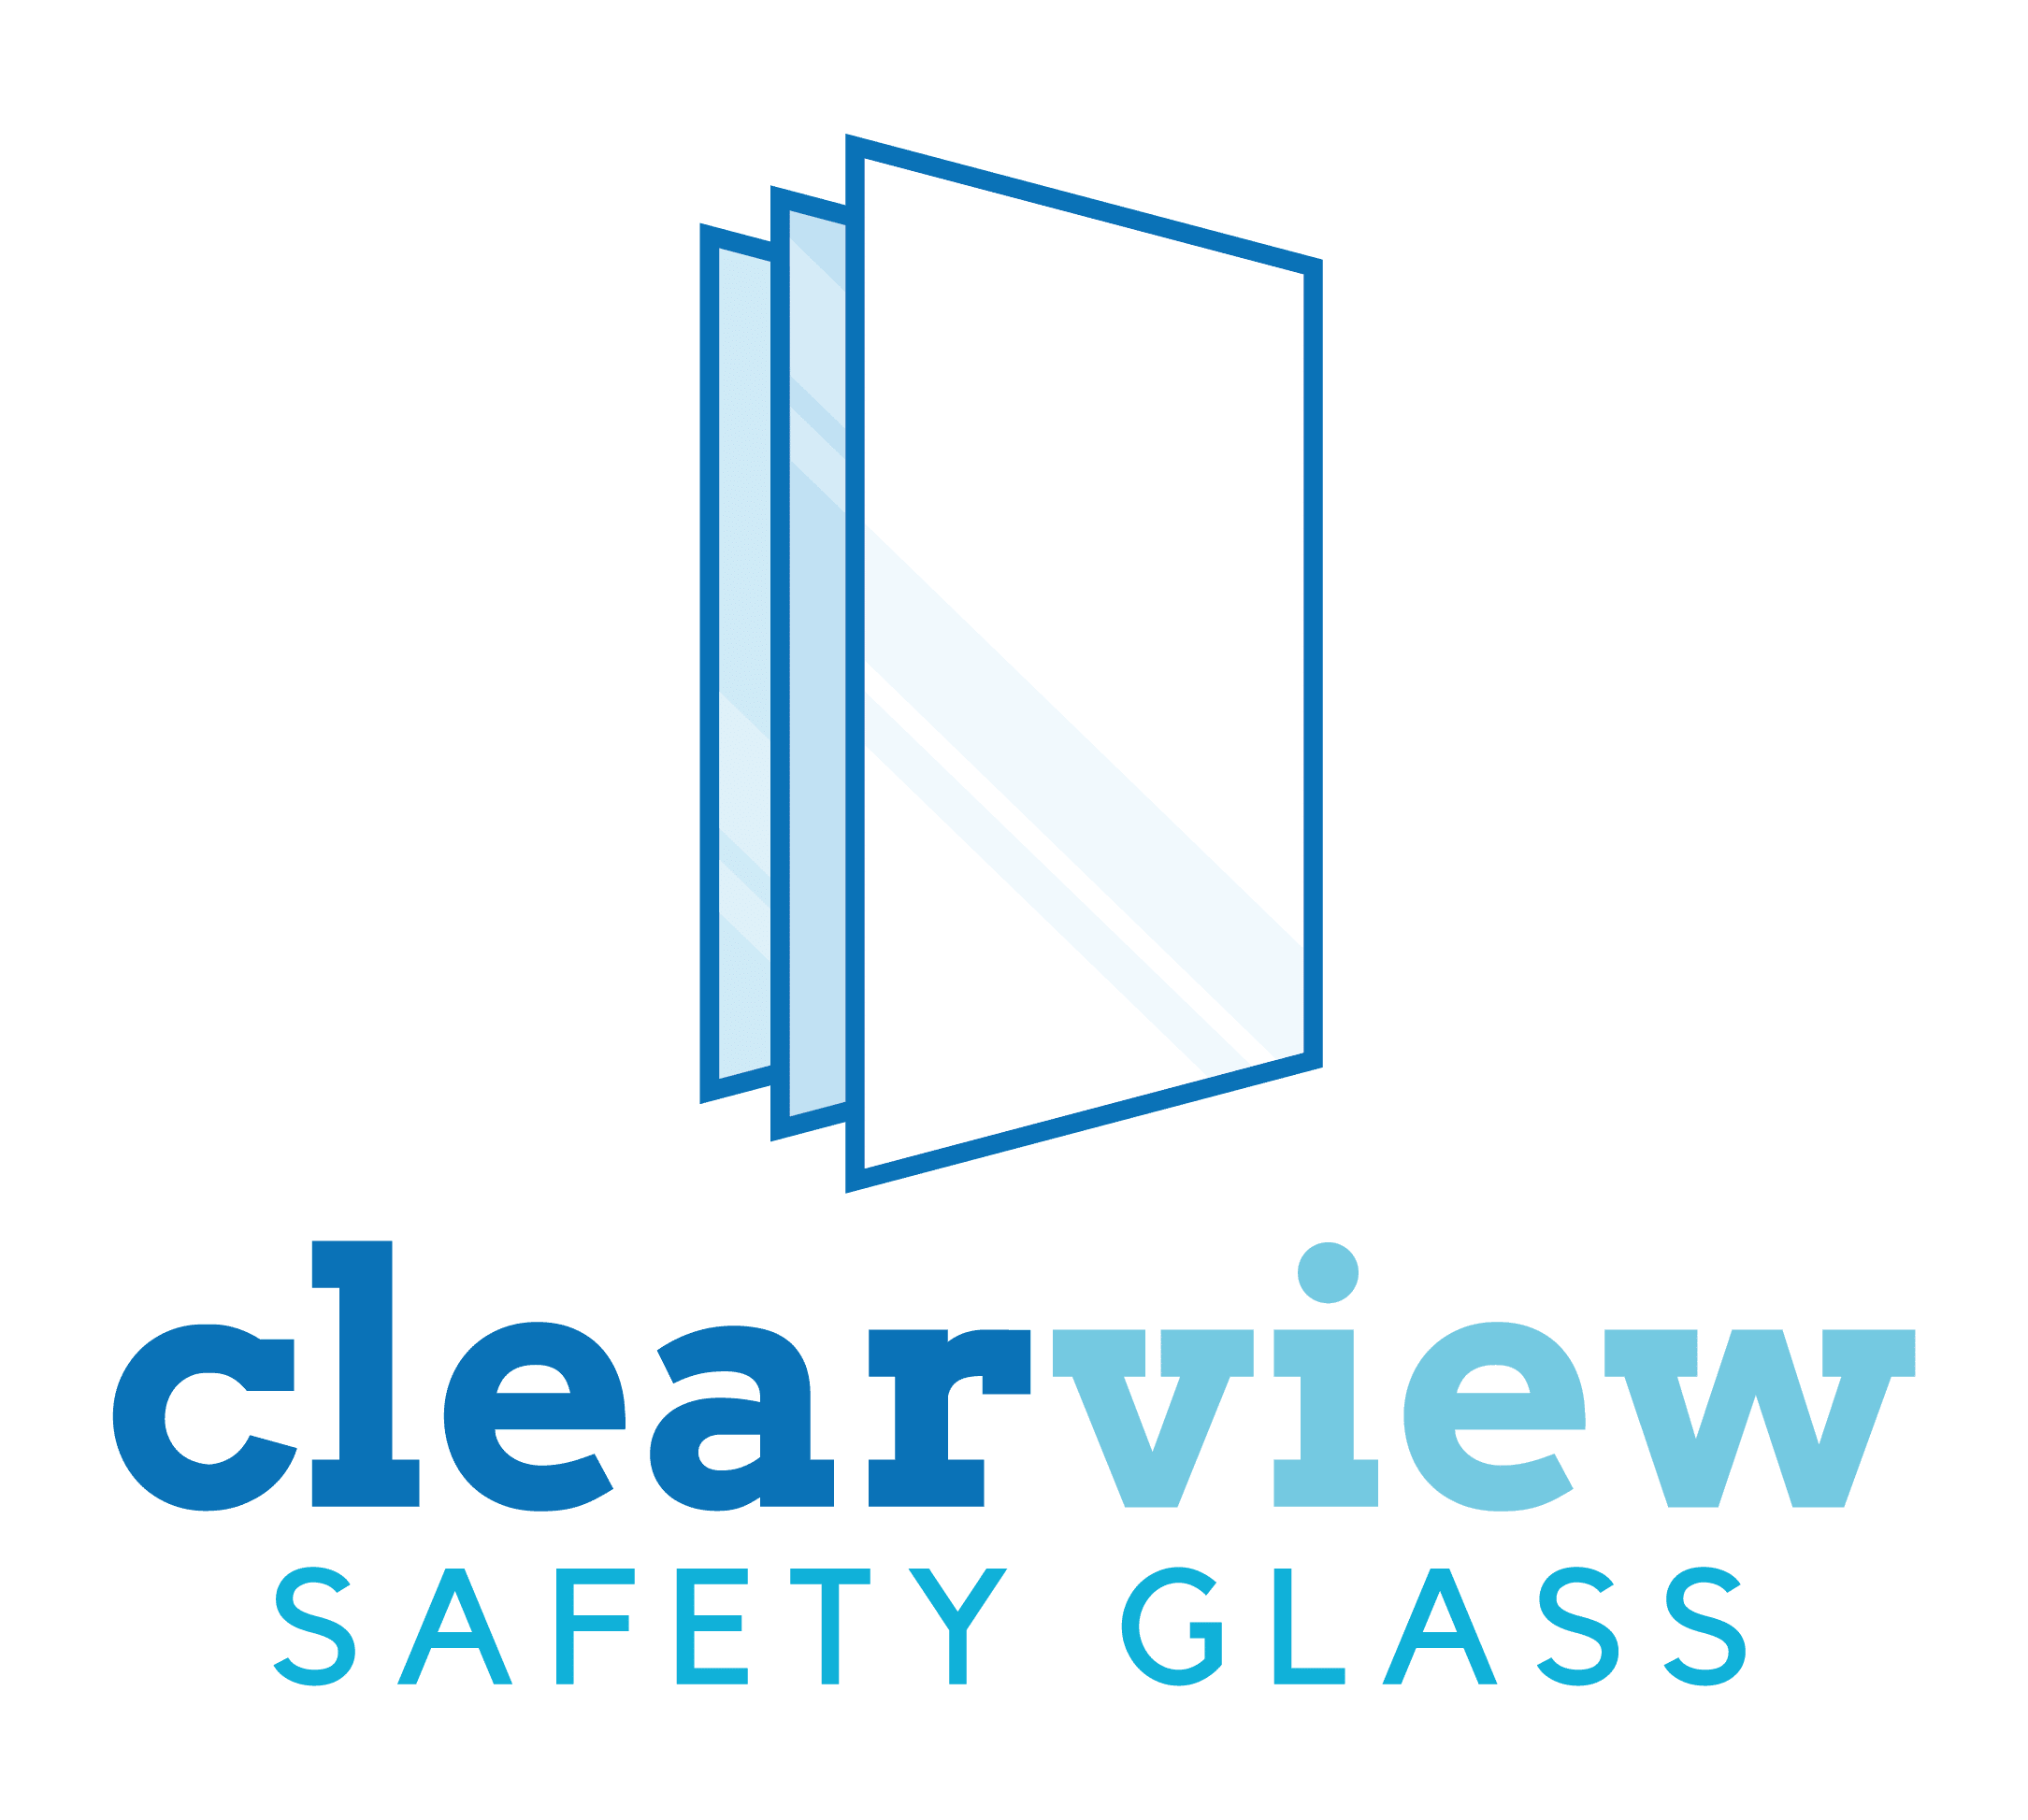 Visit Clear View Safety Glass!